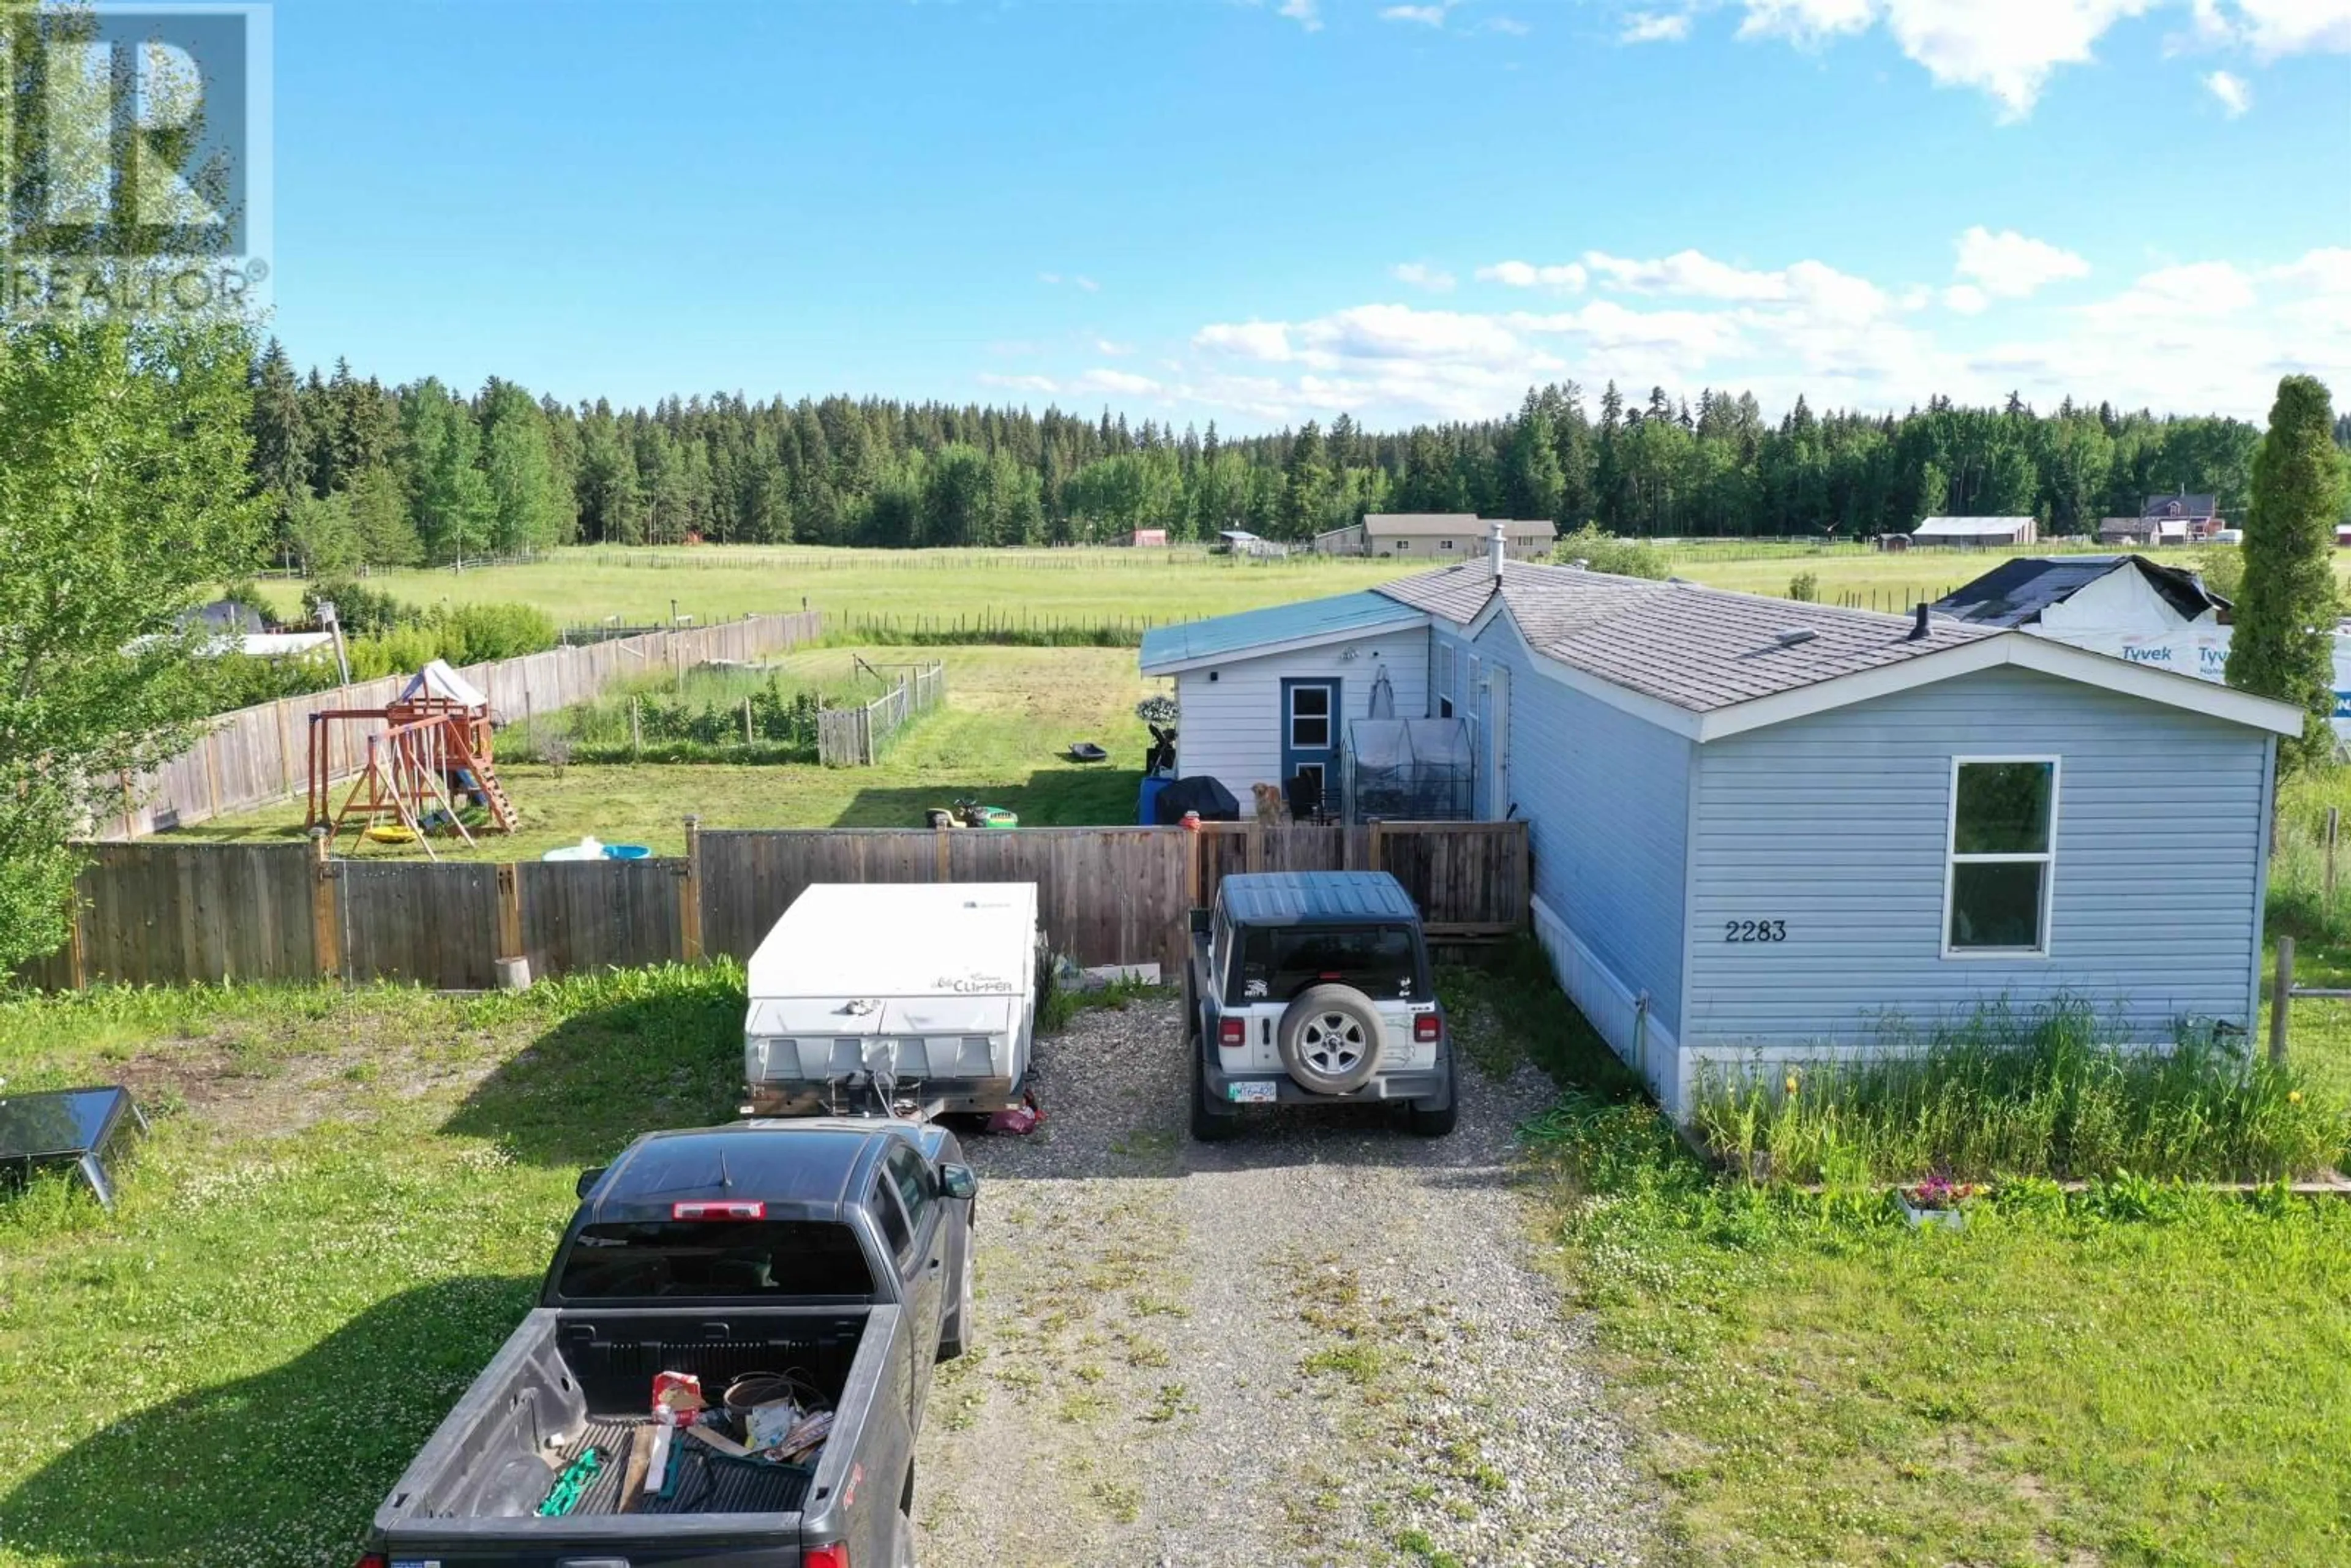 Shed for 2283 HEATON ROAD, Quesnel British Columbia V2J7C4